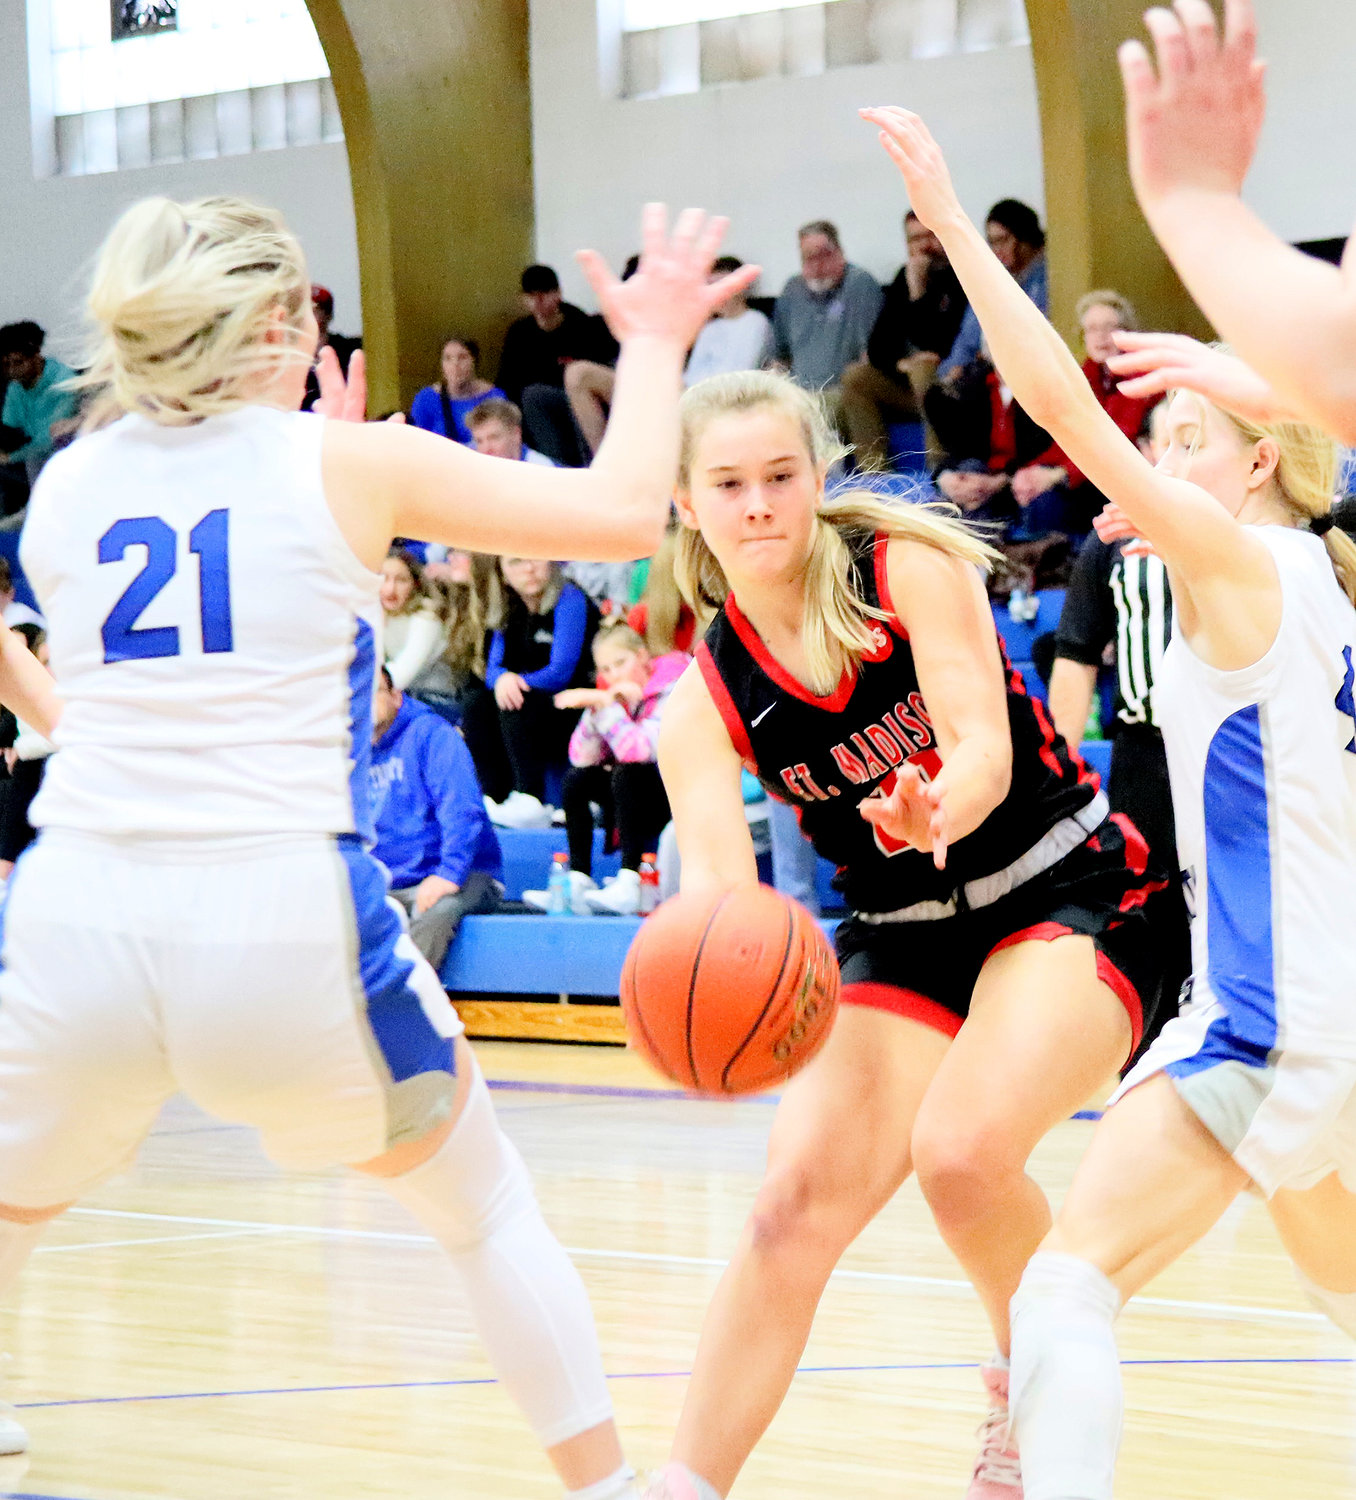 Fort Madison's Camille Kruse slides a bounce pass into the lane in the first quarter. Kruse finished with 19 points to lead the Hounds in the loss.